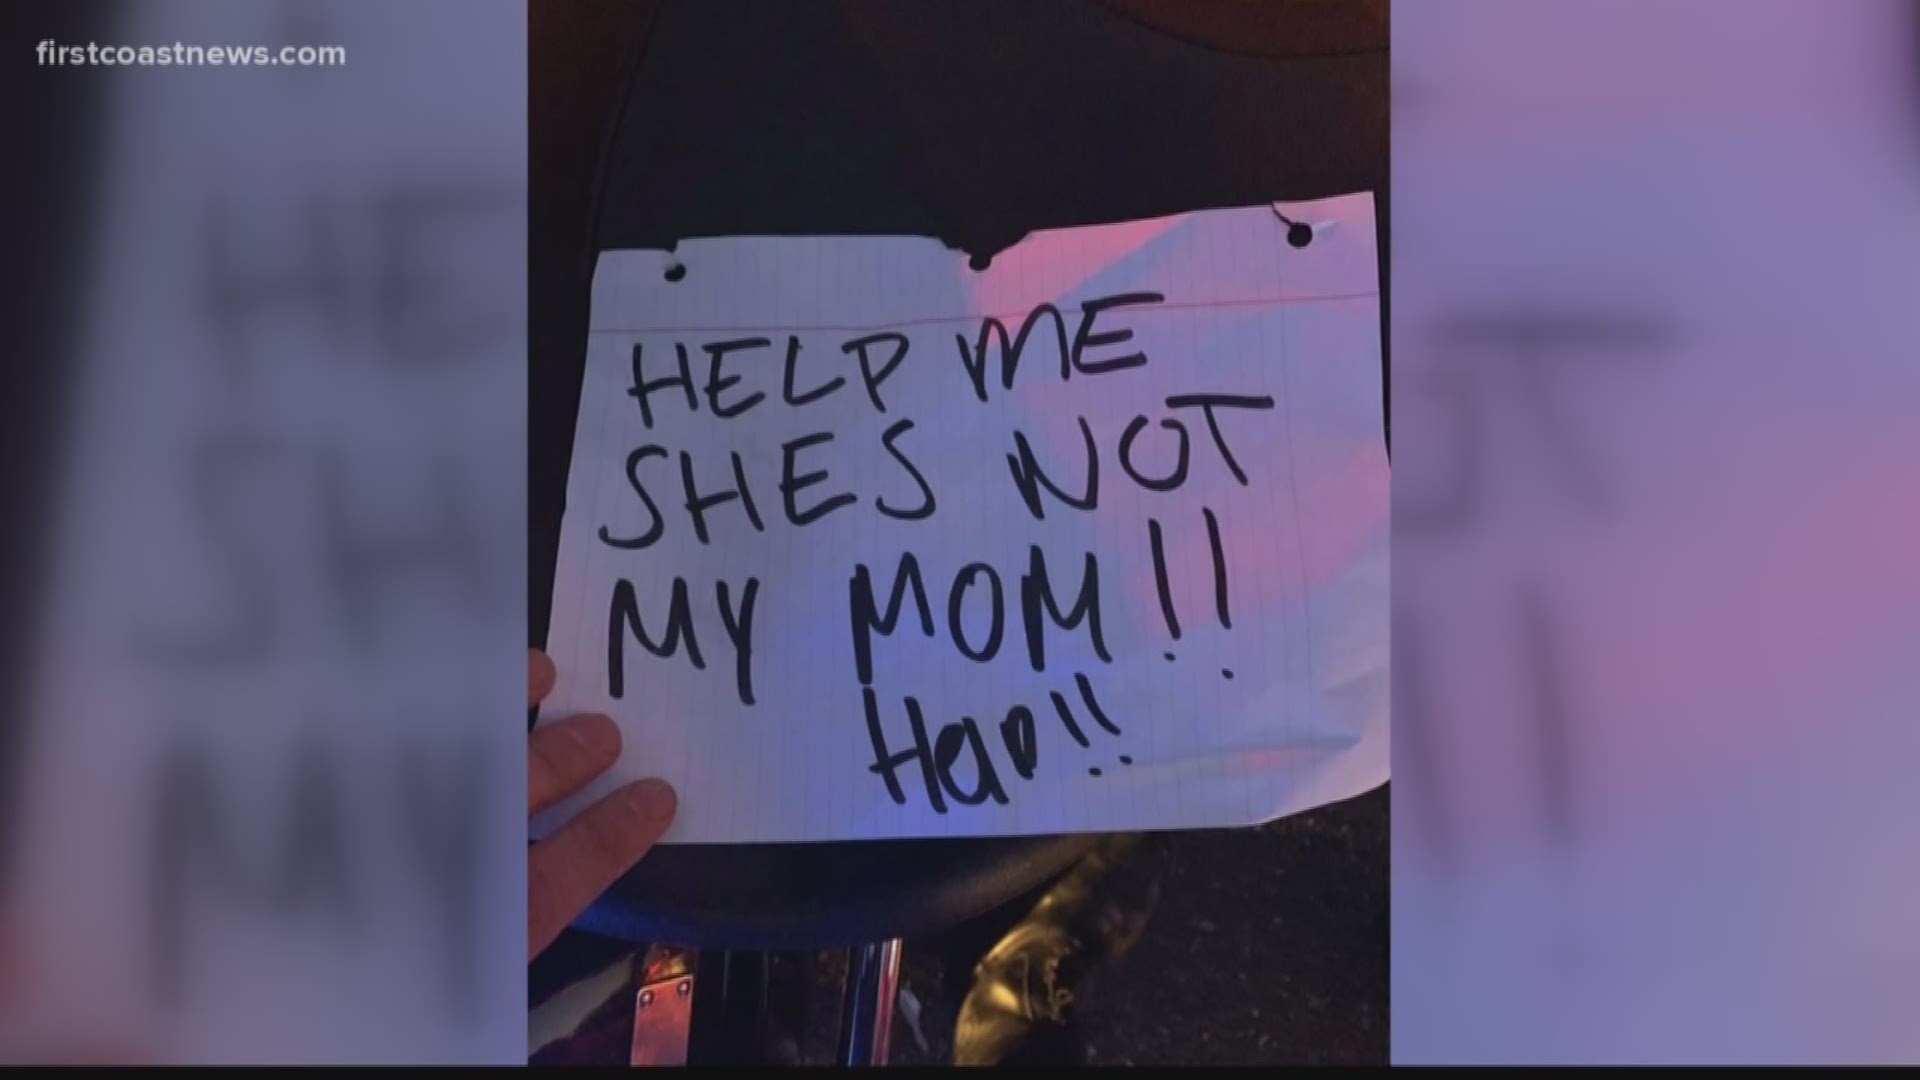 The handwritten sign said, "help me she's not my mom!! help!!"